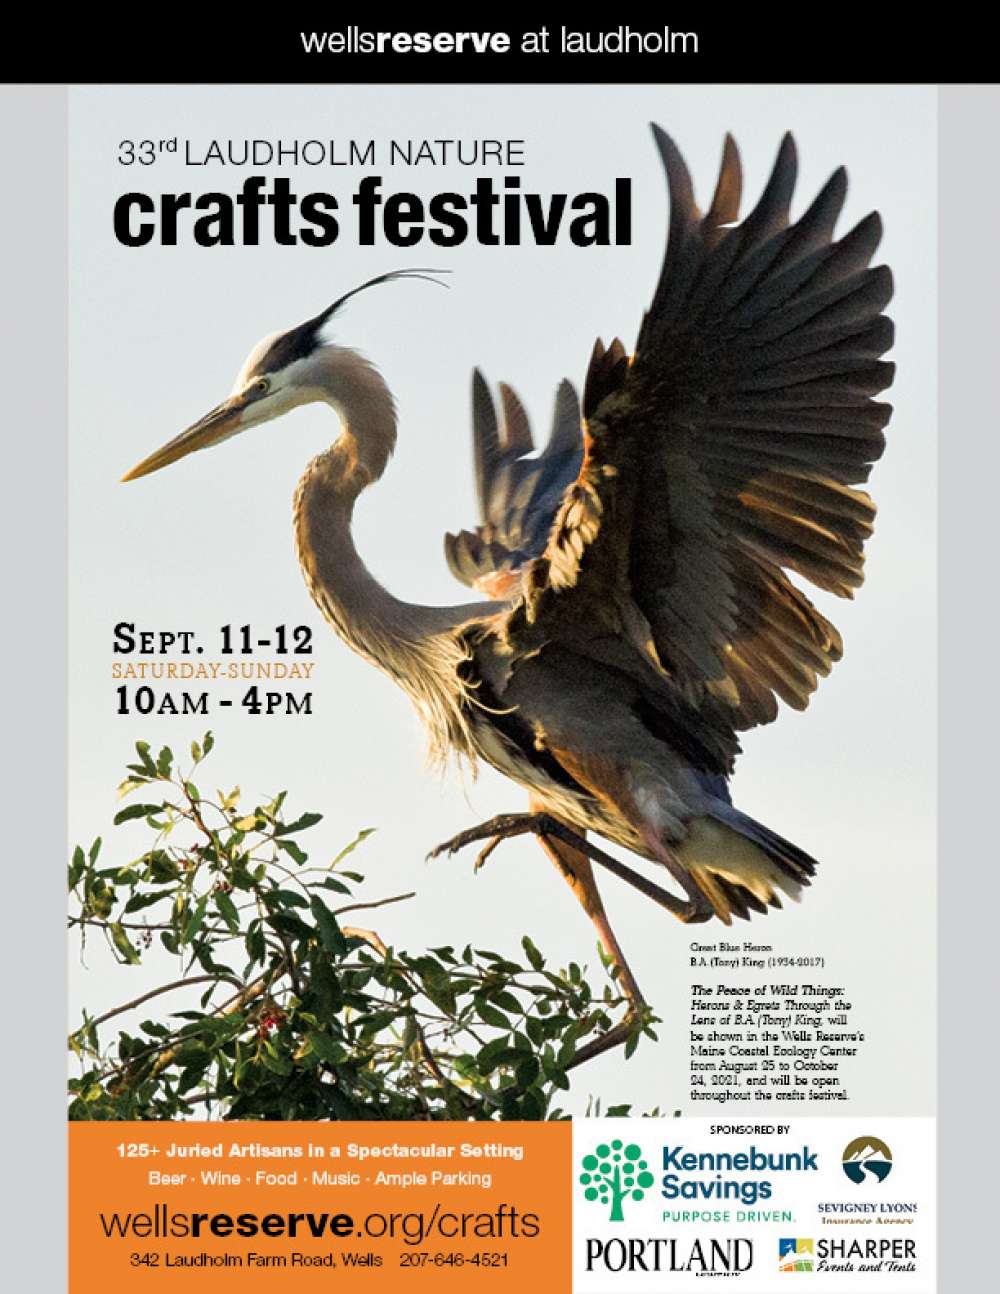 Flyer for the 33rd Laudholm Nature Crafts Festival features a great blue heron landing on a tree top, photographed by Tony King. Details of the event are provided.